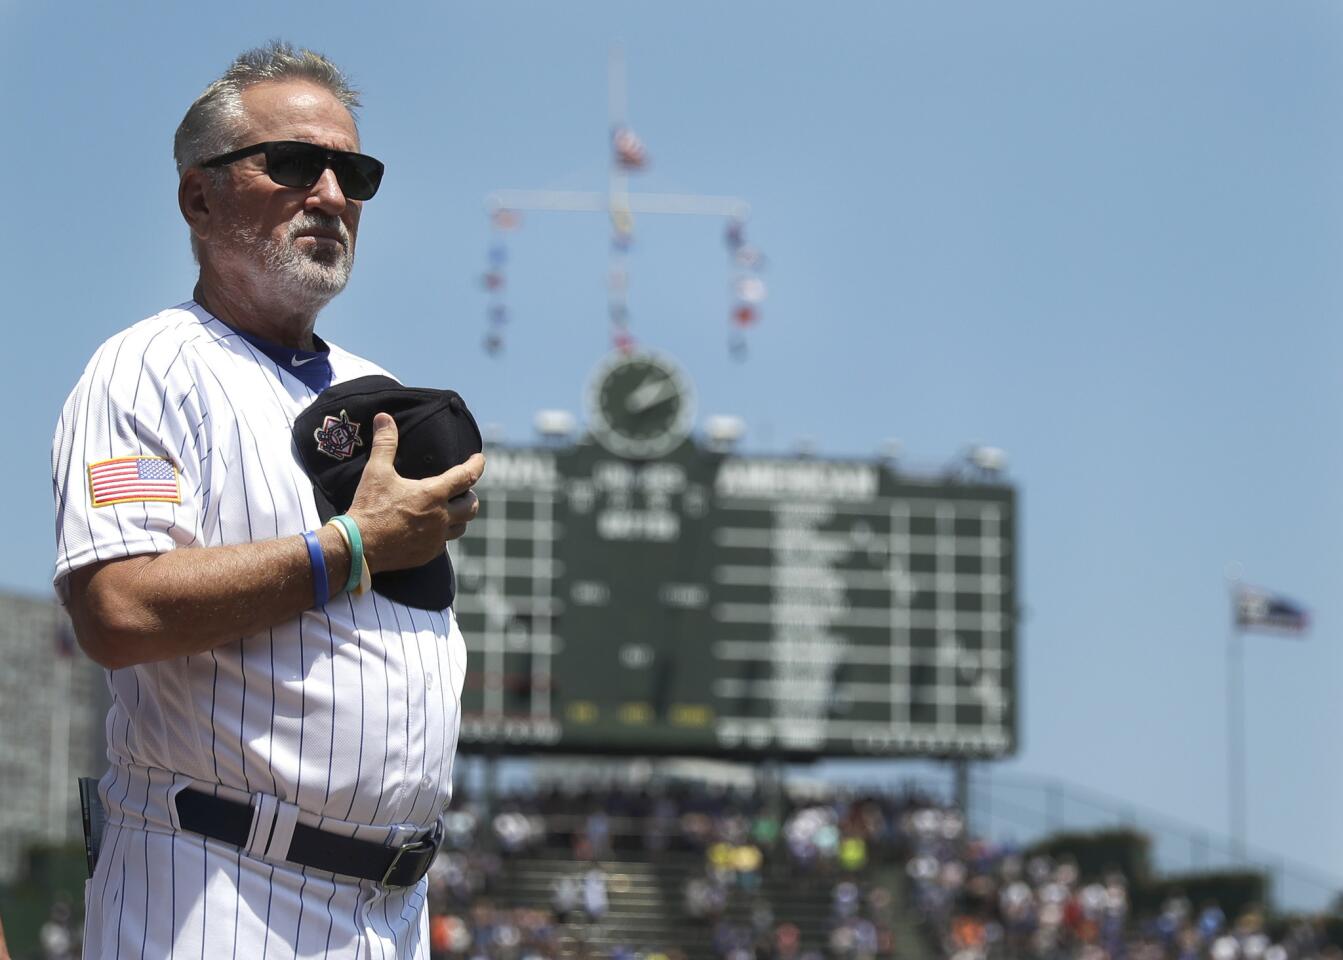 Cubs manager Joe Maddon stands for the national anthem before a game against the Tigers at Wrigley Field, Tuesday, July 3, 2018.